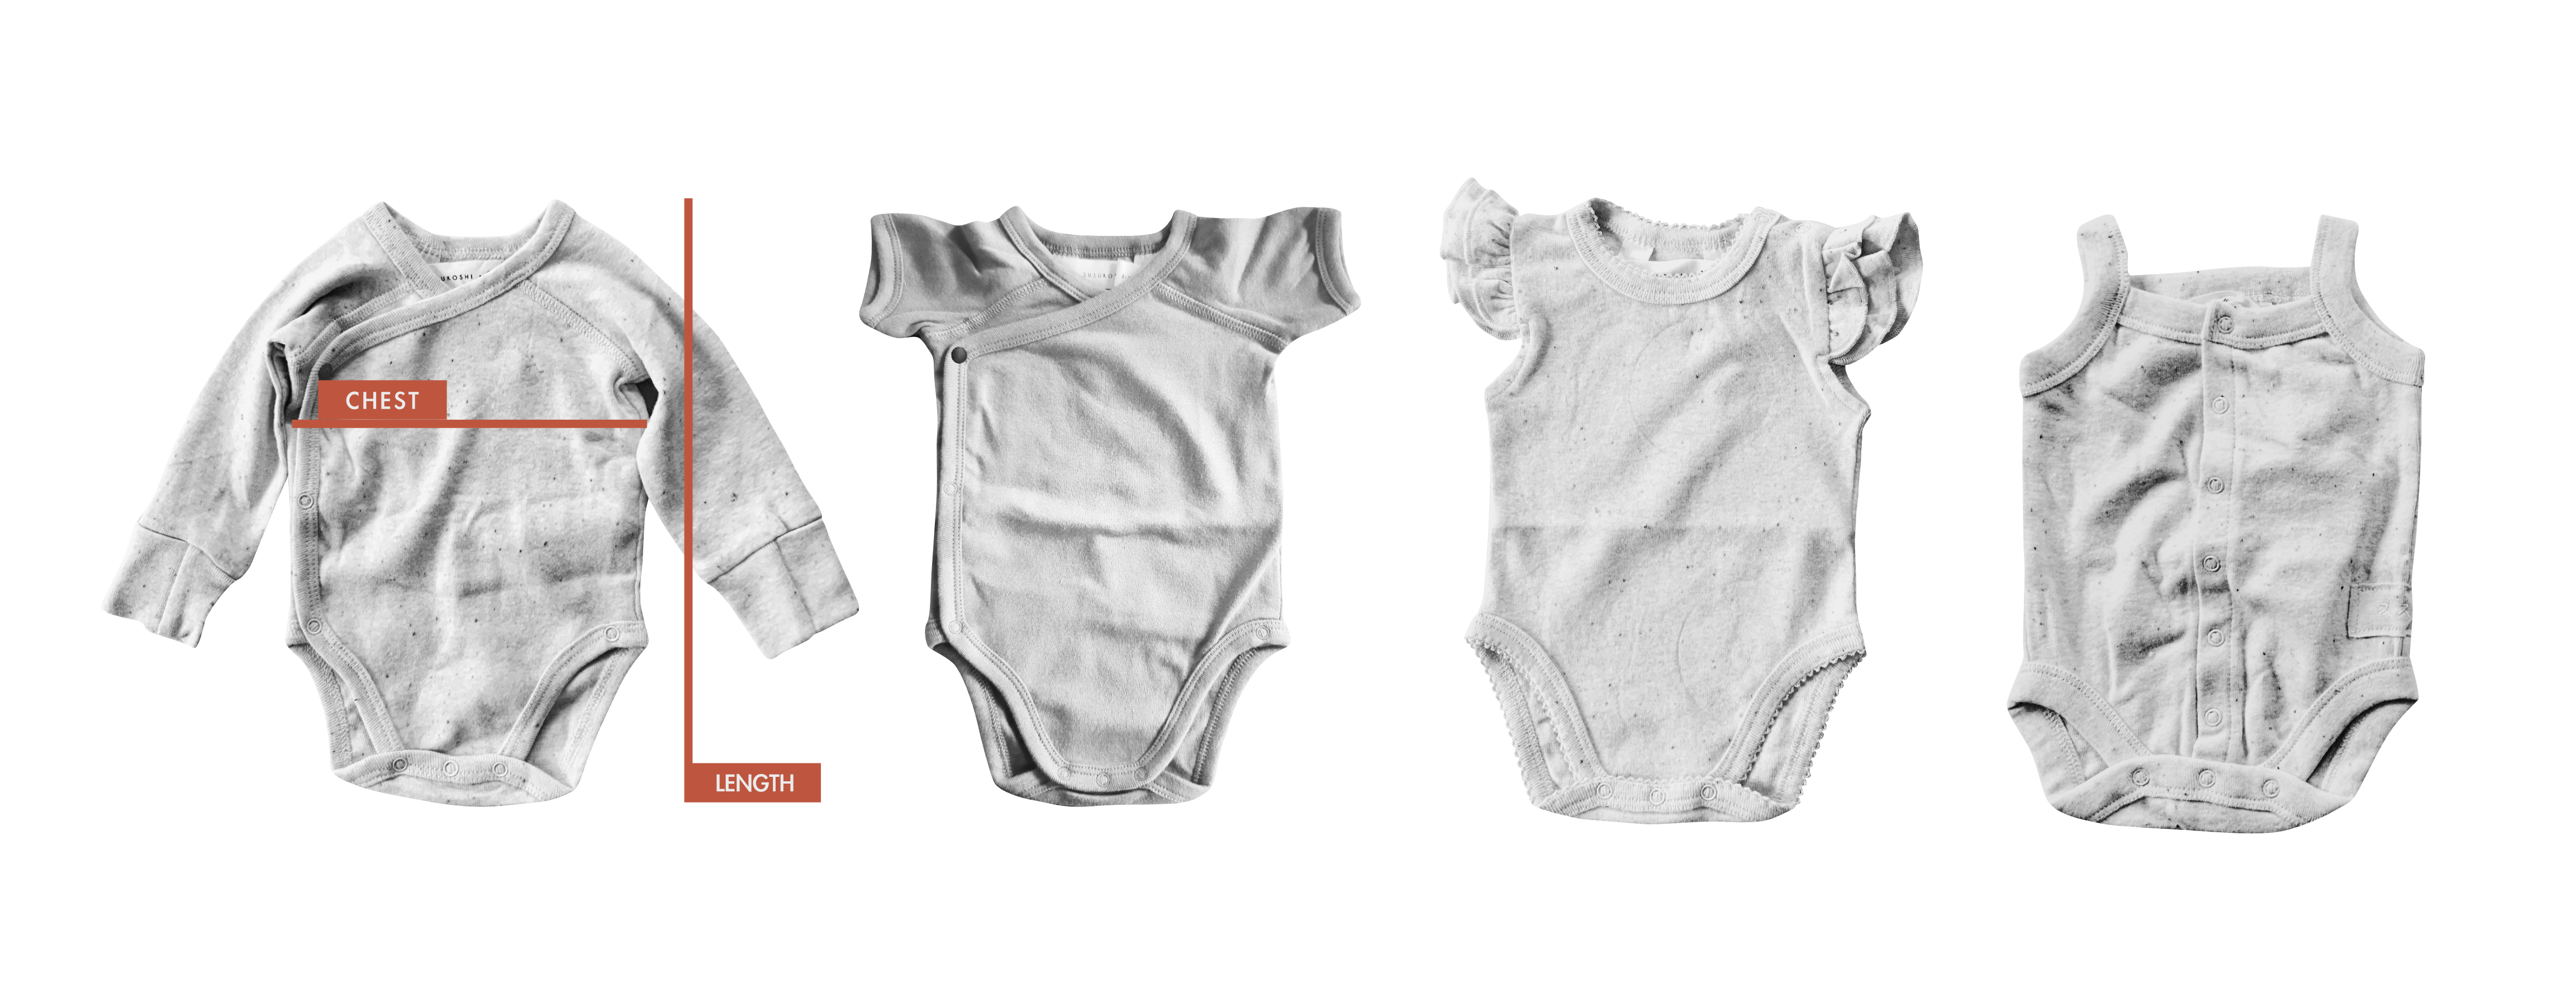 bodysuits size guide